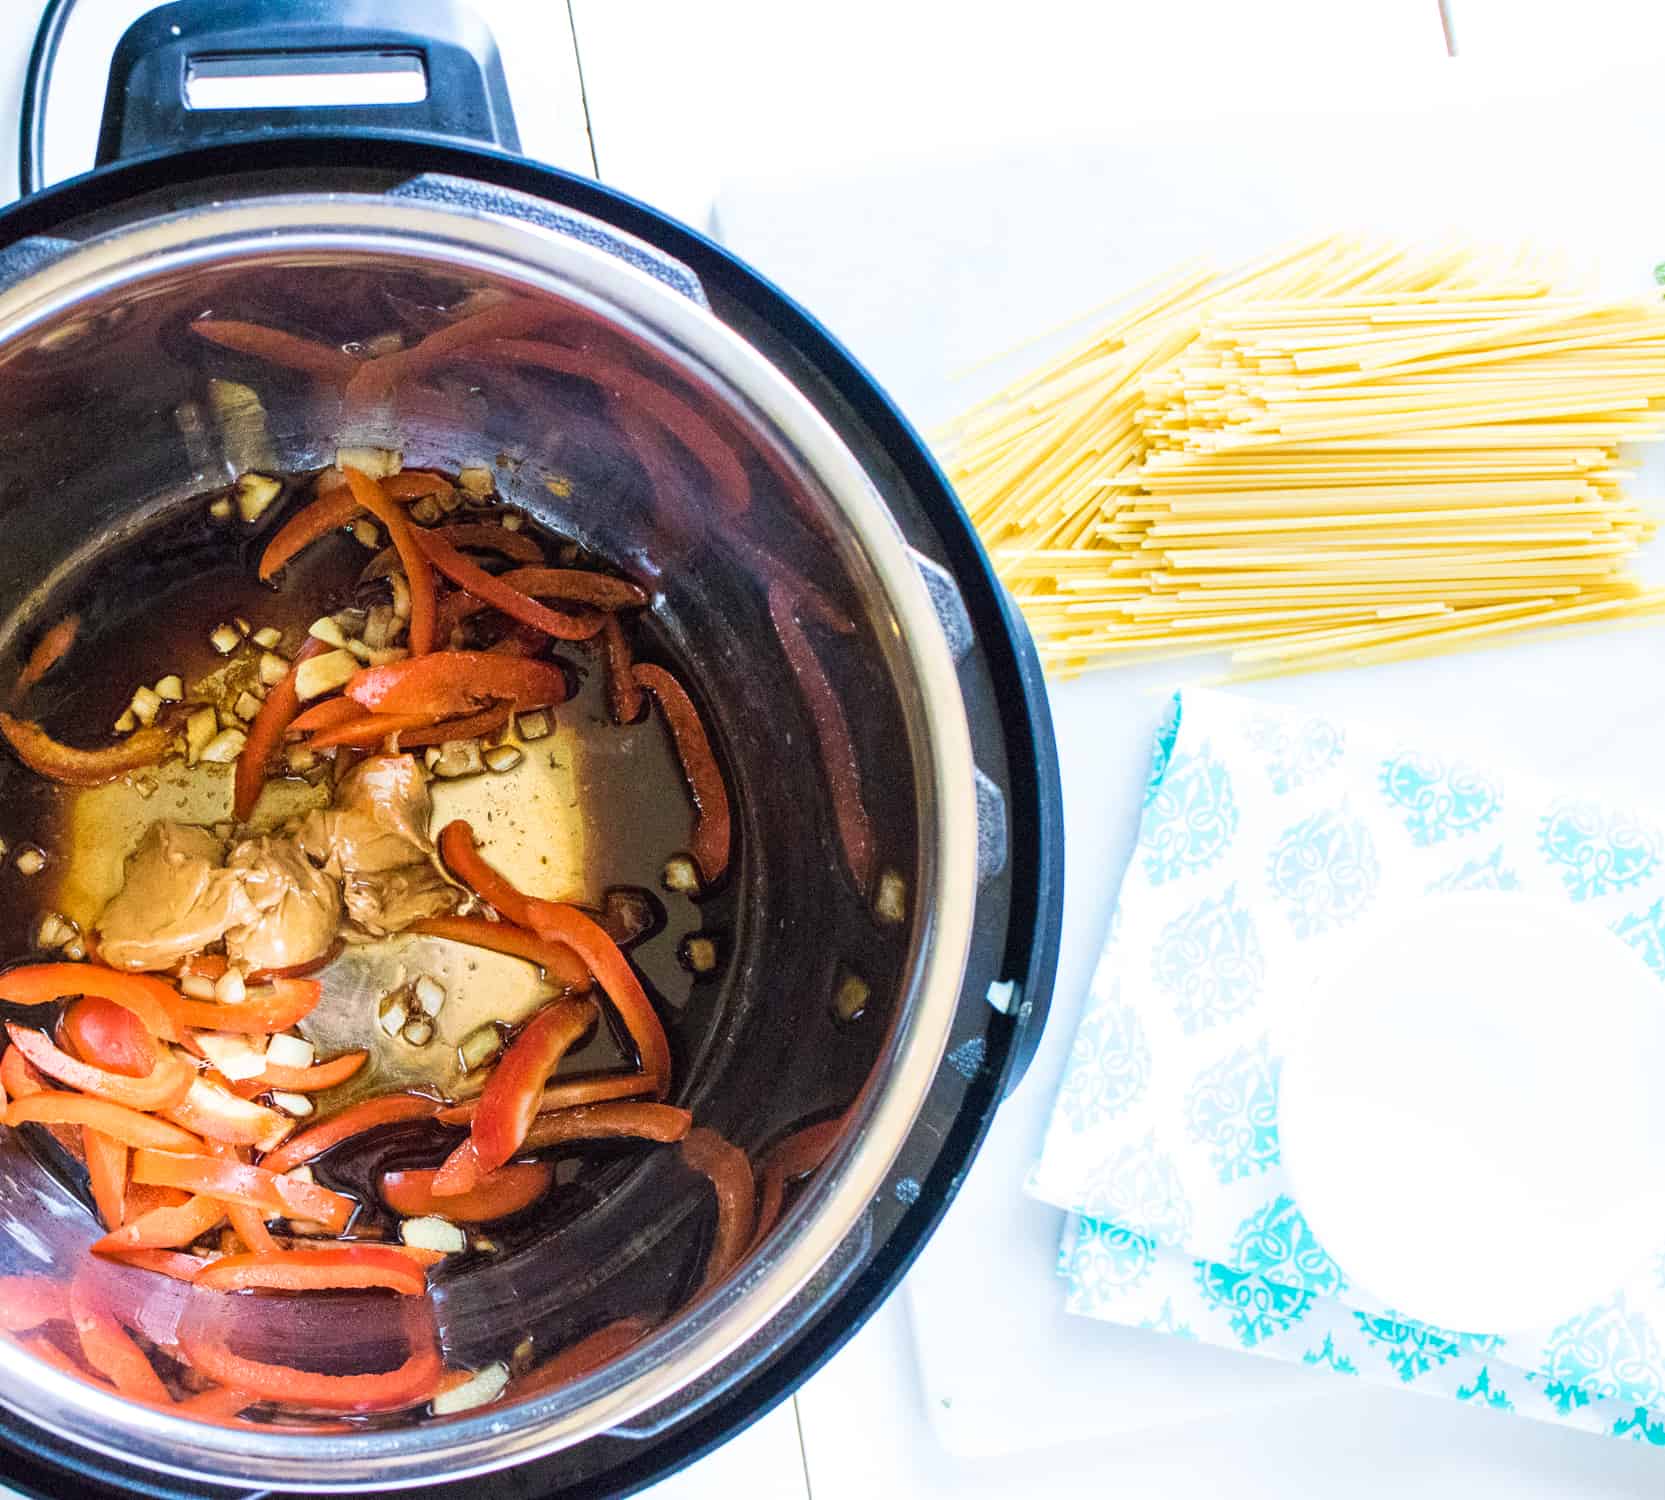 Uncooked noodles and a blue patterned napkin on a table next to an Instant Pot with ingredients for Thai Peanut Noodles inside